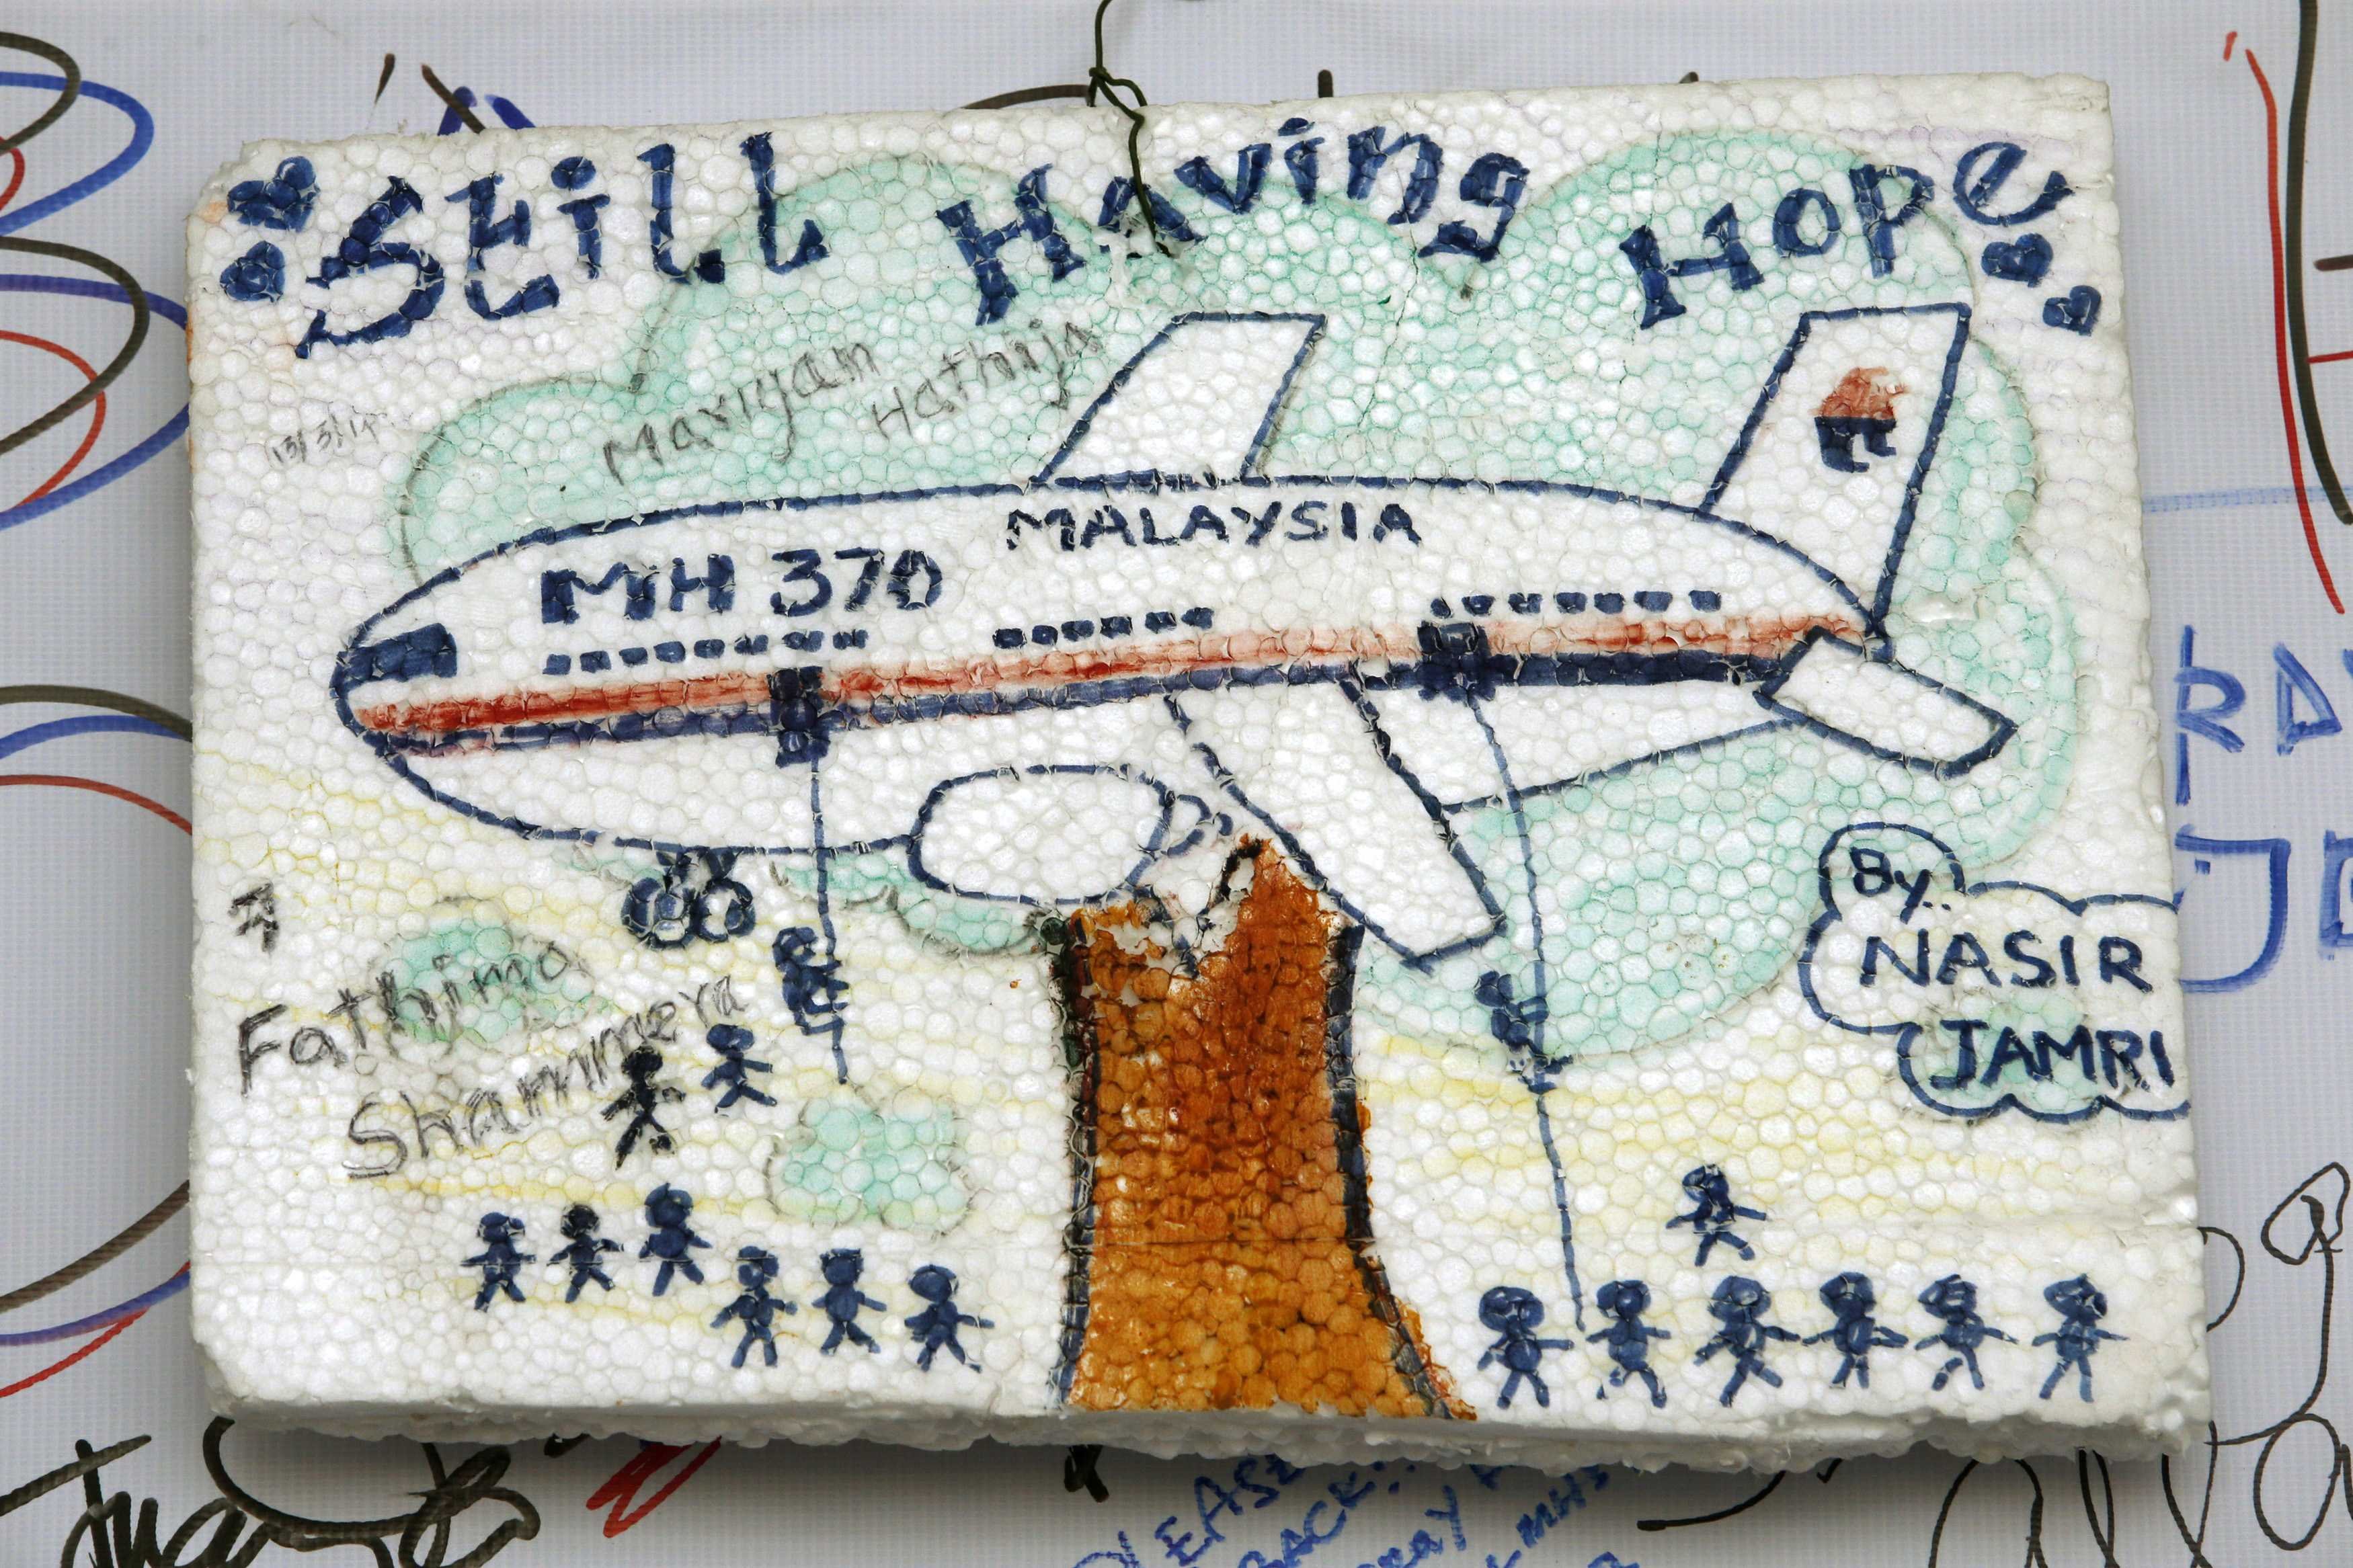 Children's artworks hoping for the safe return of Flight MH370's passengers and crew are seen hanging at Kuala Lumpur International Airport, March 19, 2014.